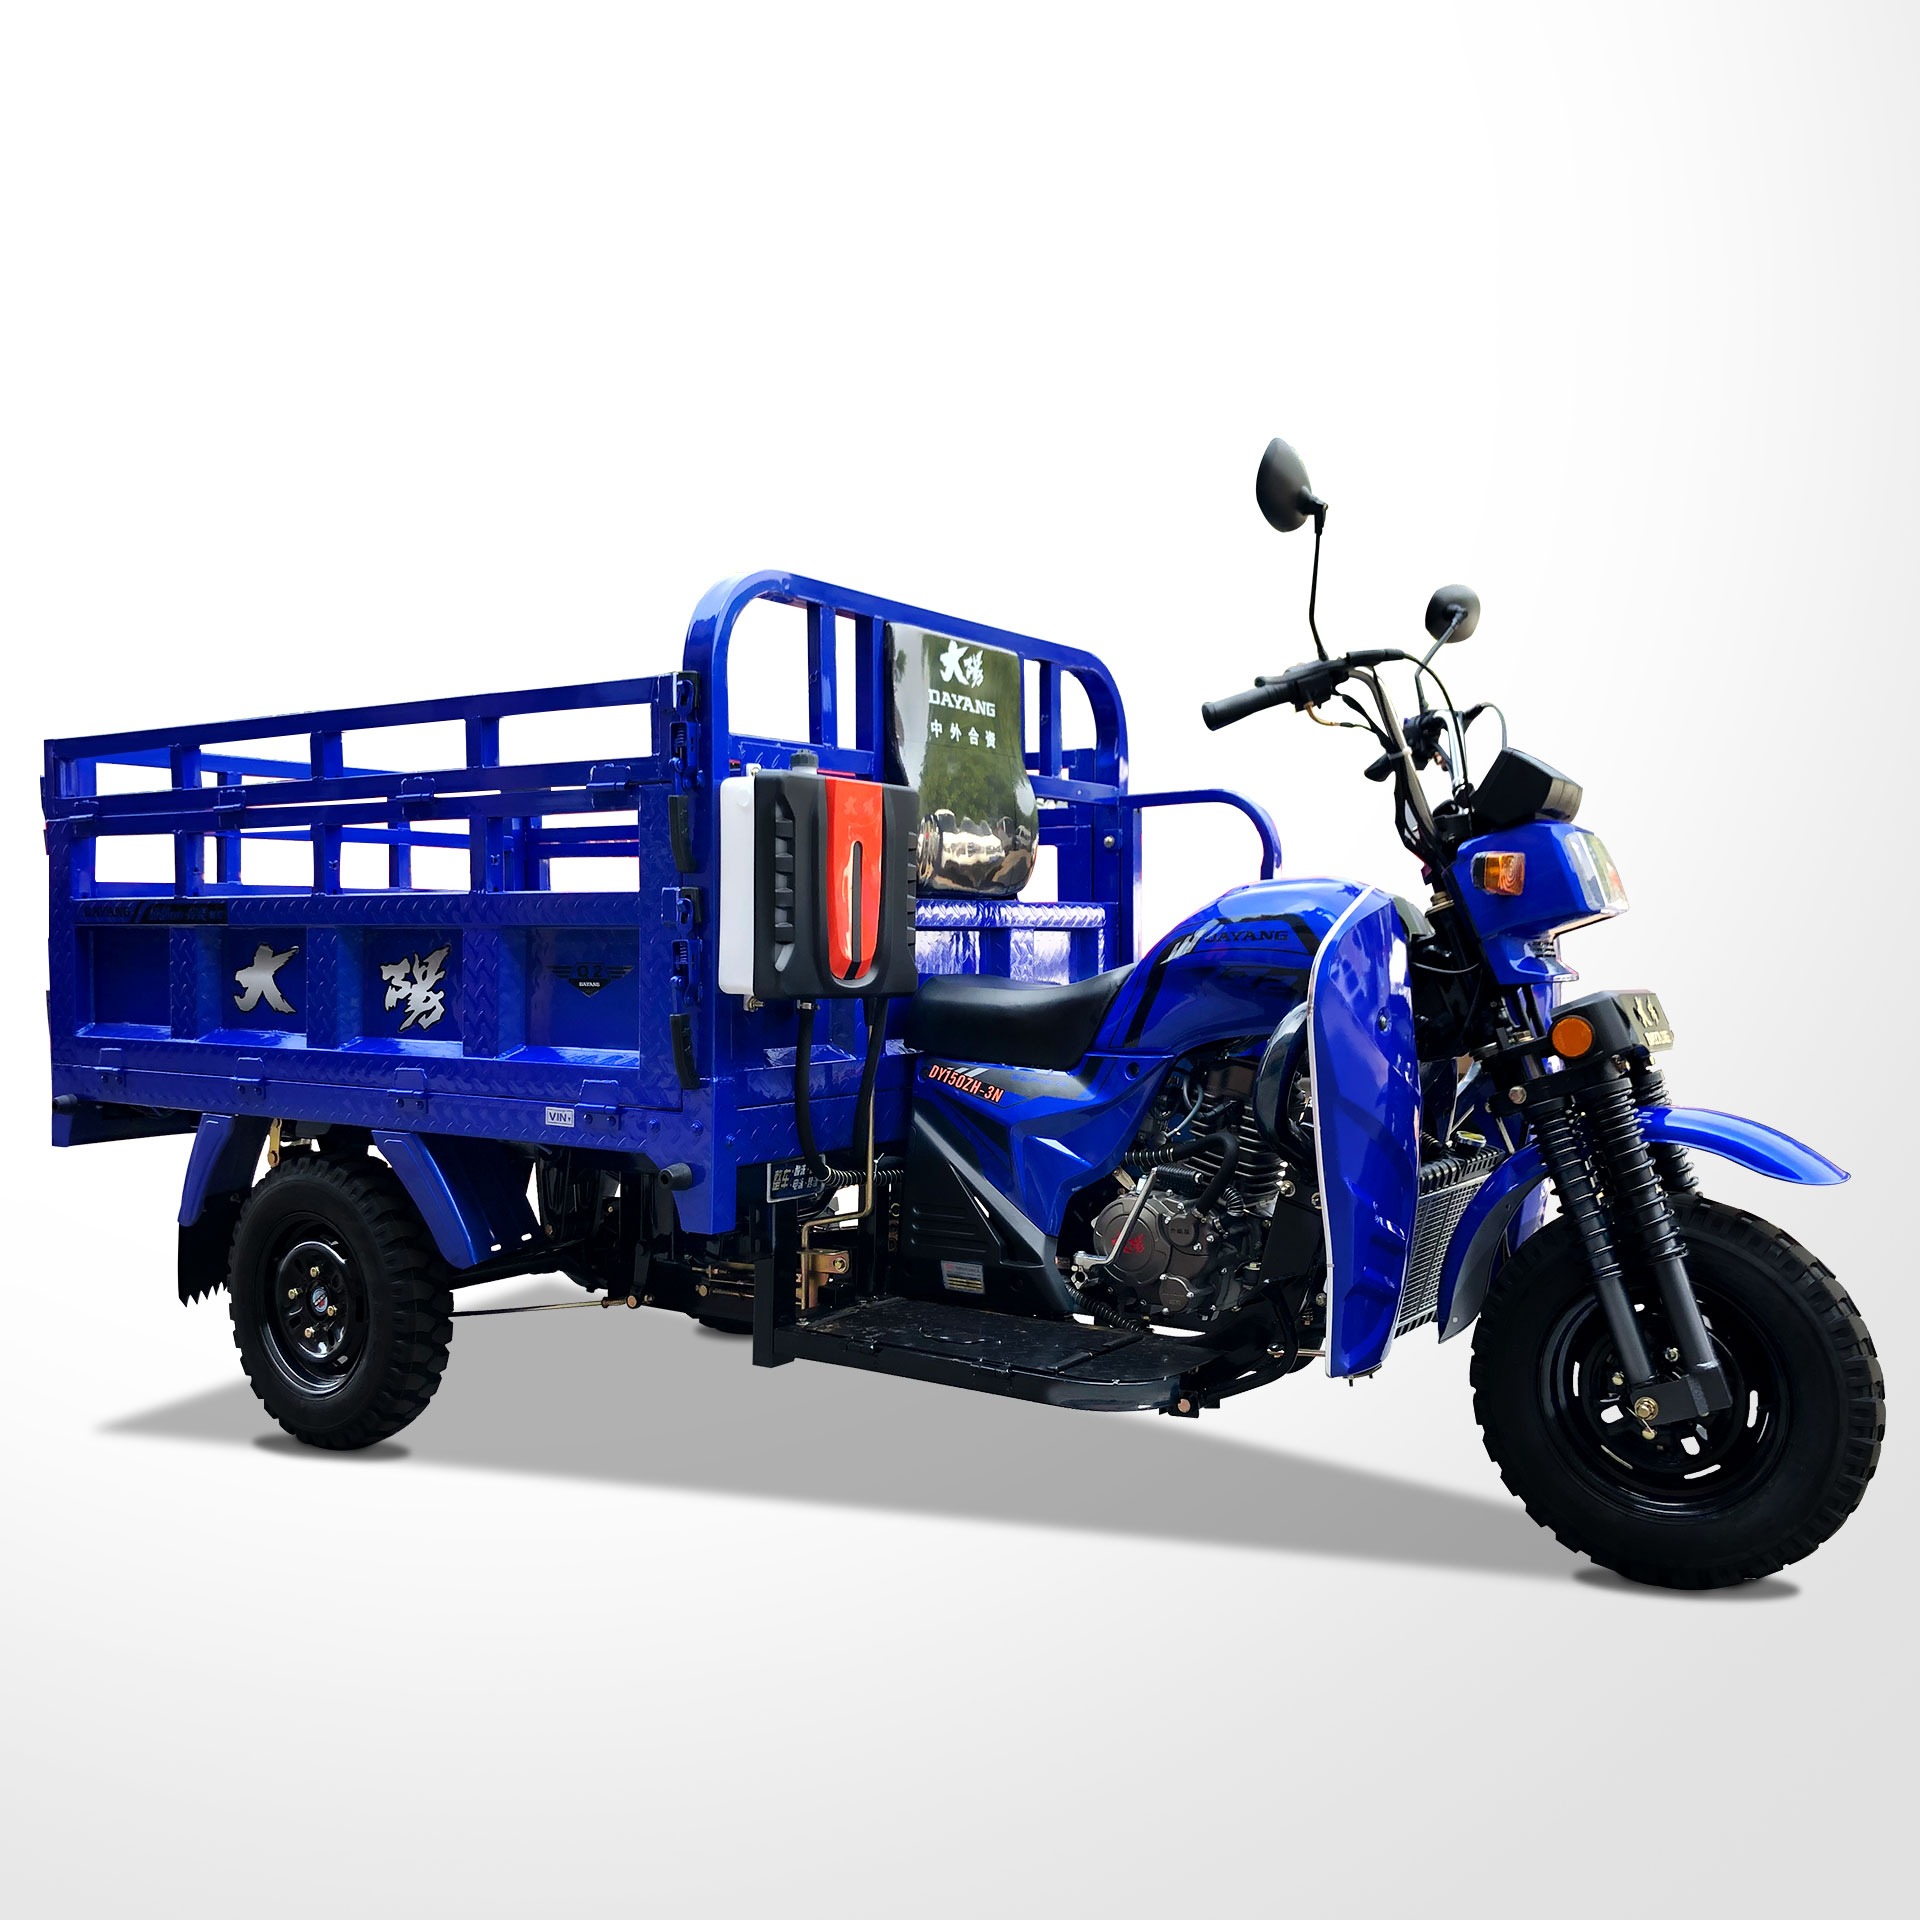 2016 high quality new design 200cc 250cc china manufacturer trimoto de carga&motor cargo tricycle for sale in Zambia